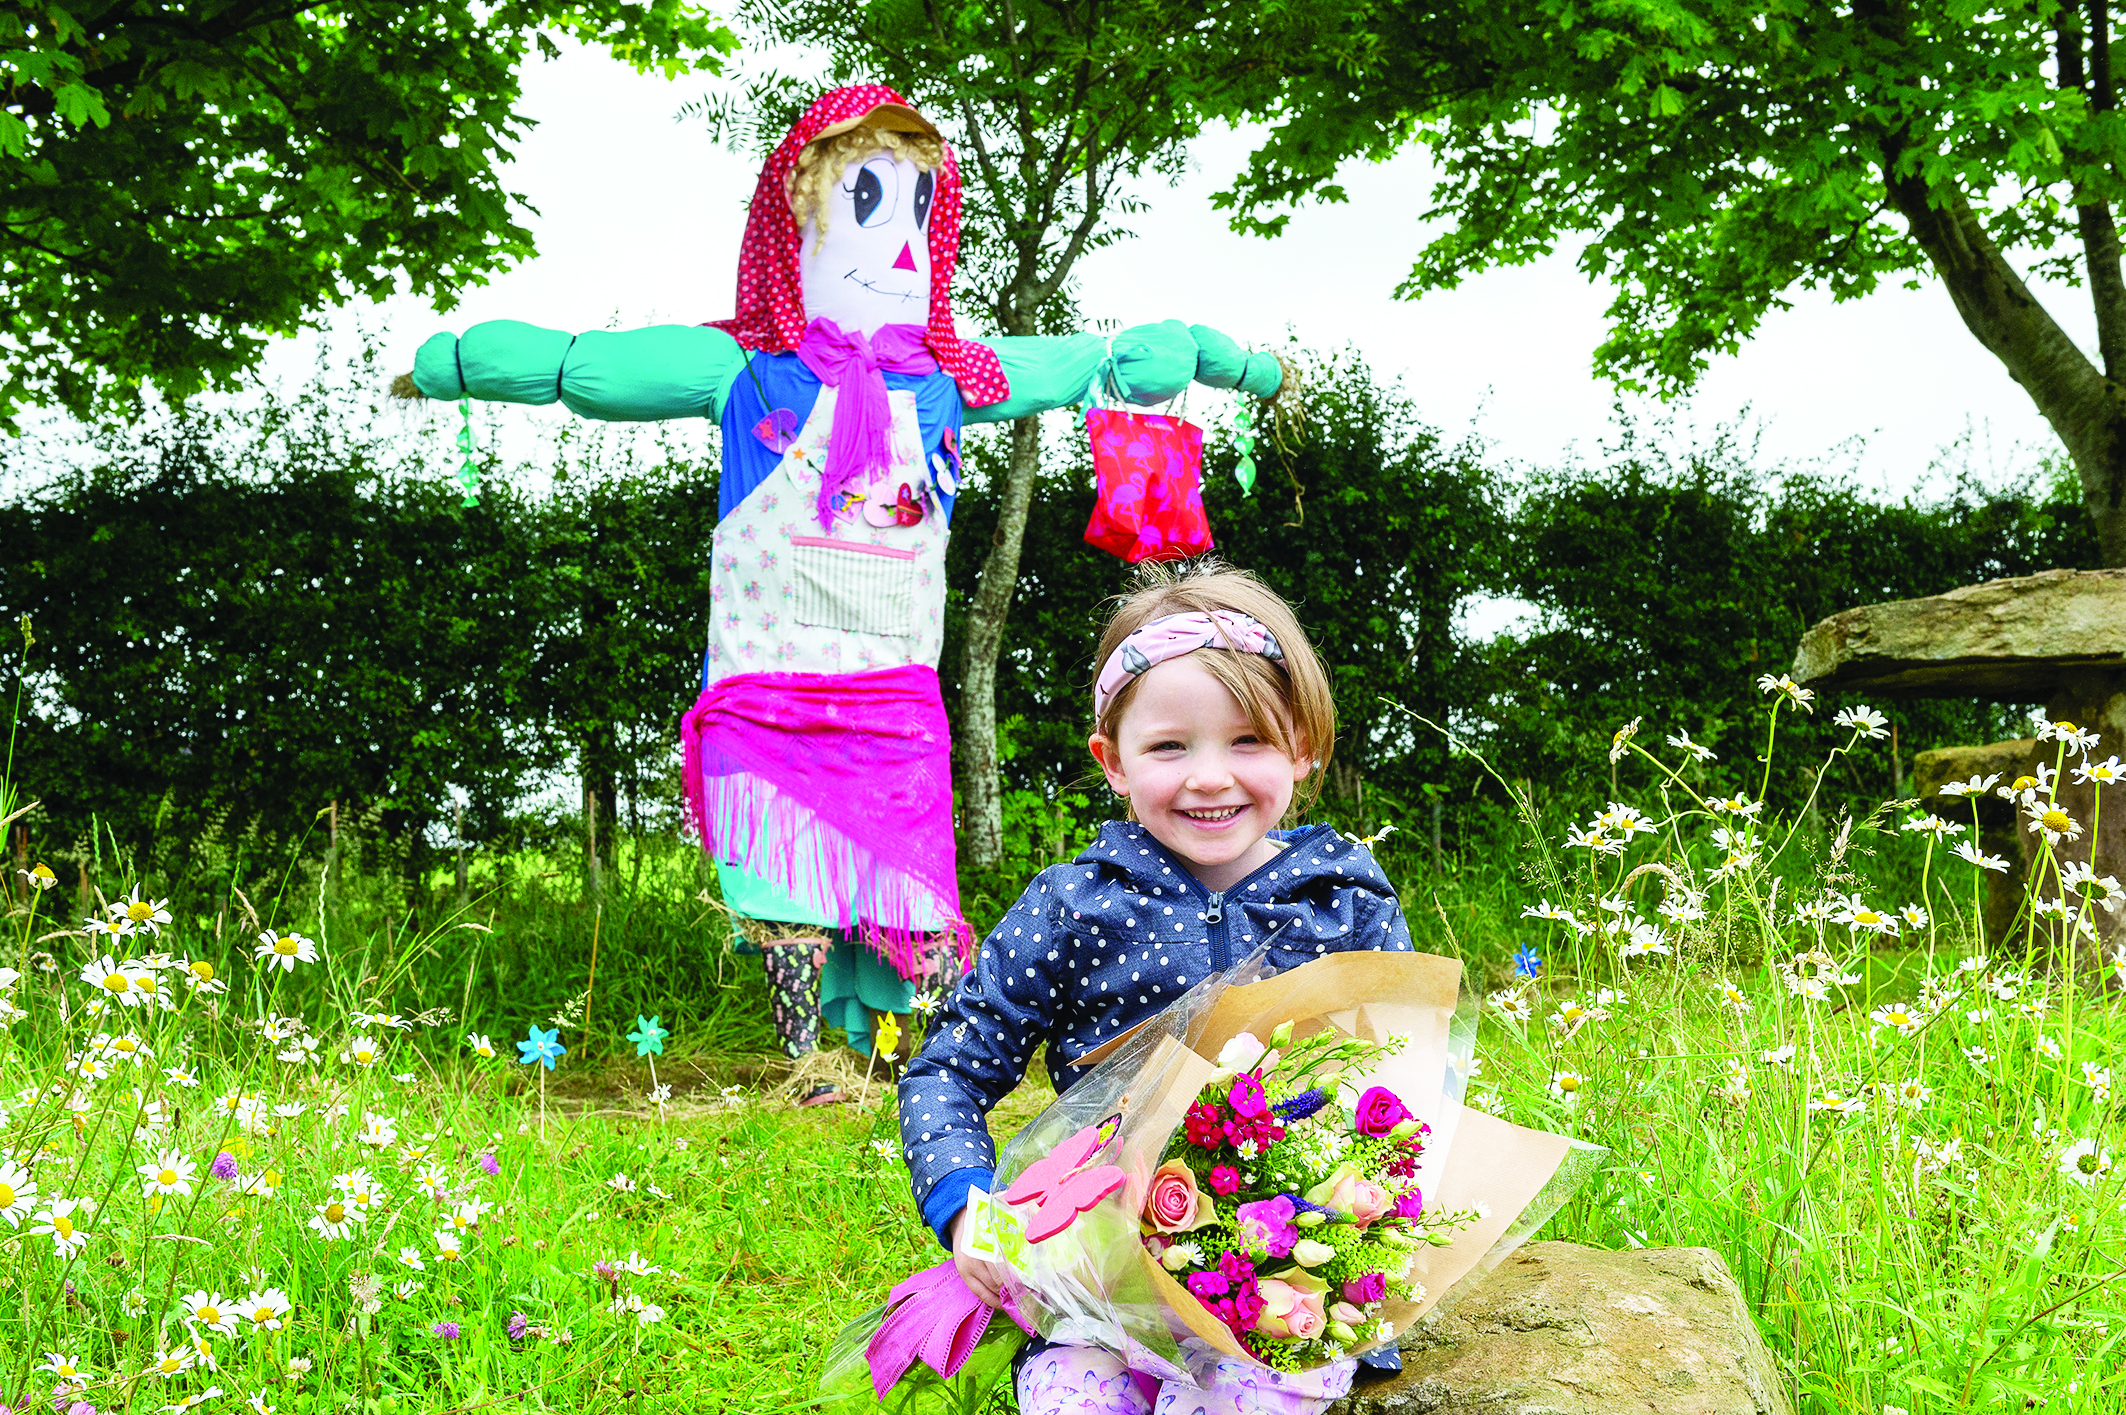 Kind-hearted Bella helps restore ‘Molly the Scarecrow’